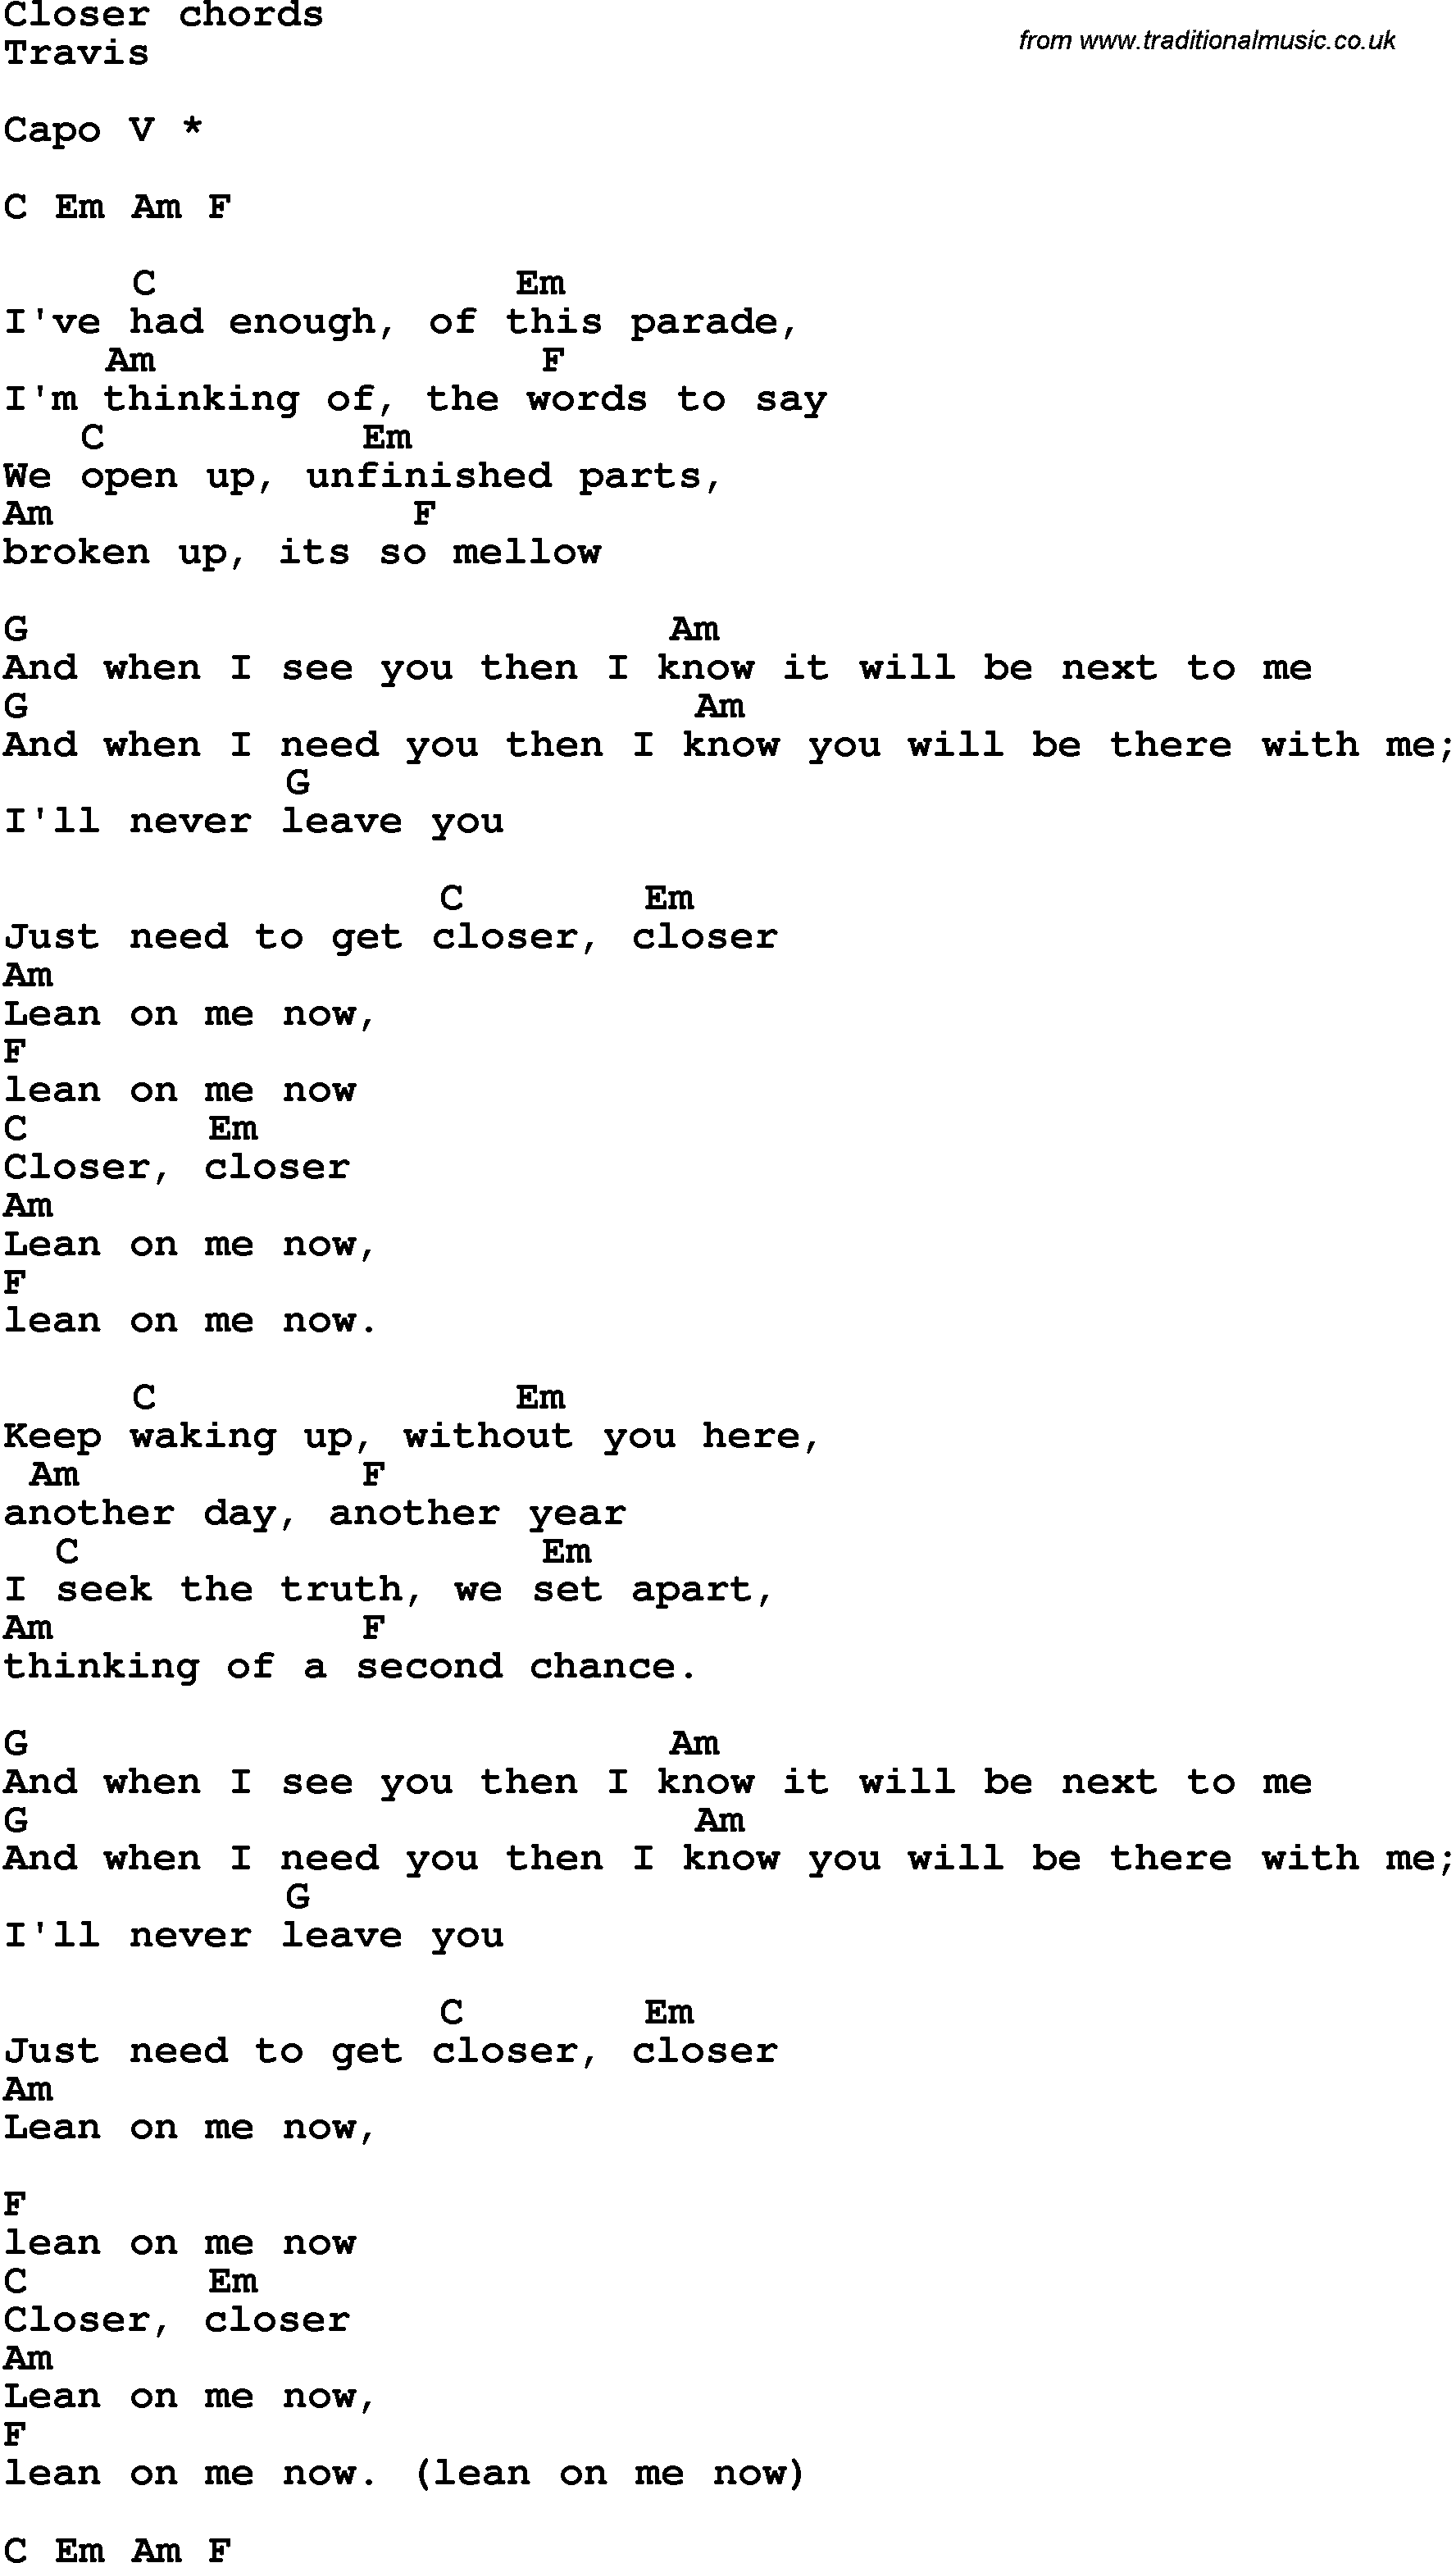 Song Lyrics with guitar chords for Closer